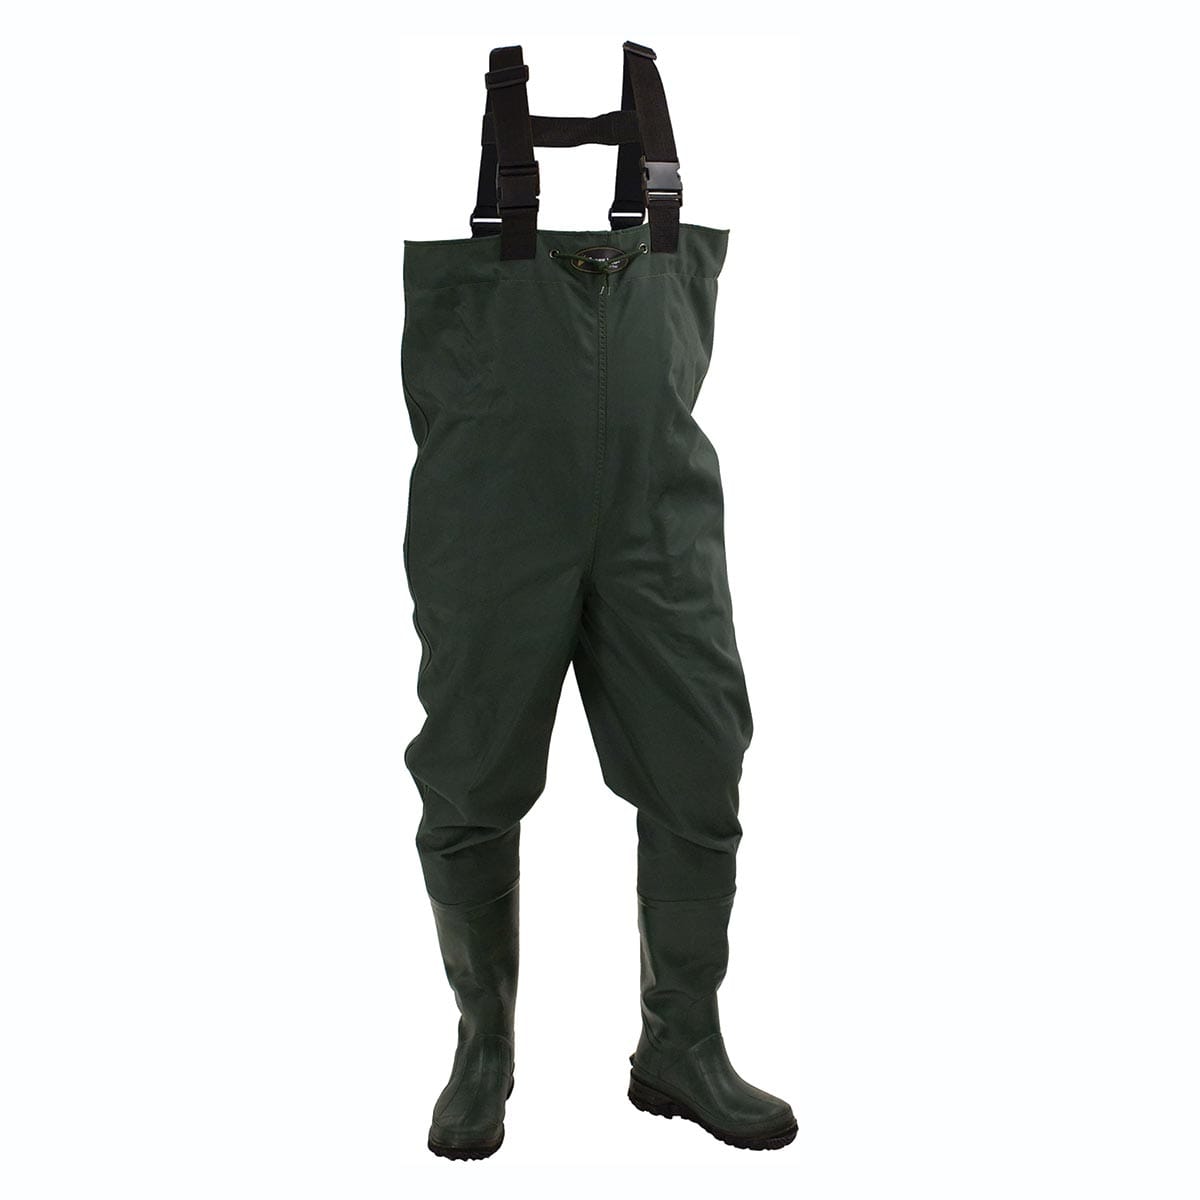 Frogg Toggs Amphib Neoprene Boot-Foot Chest Waders for Men